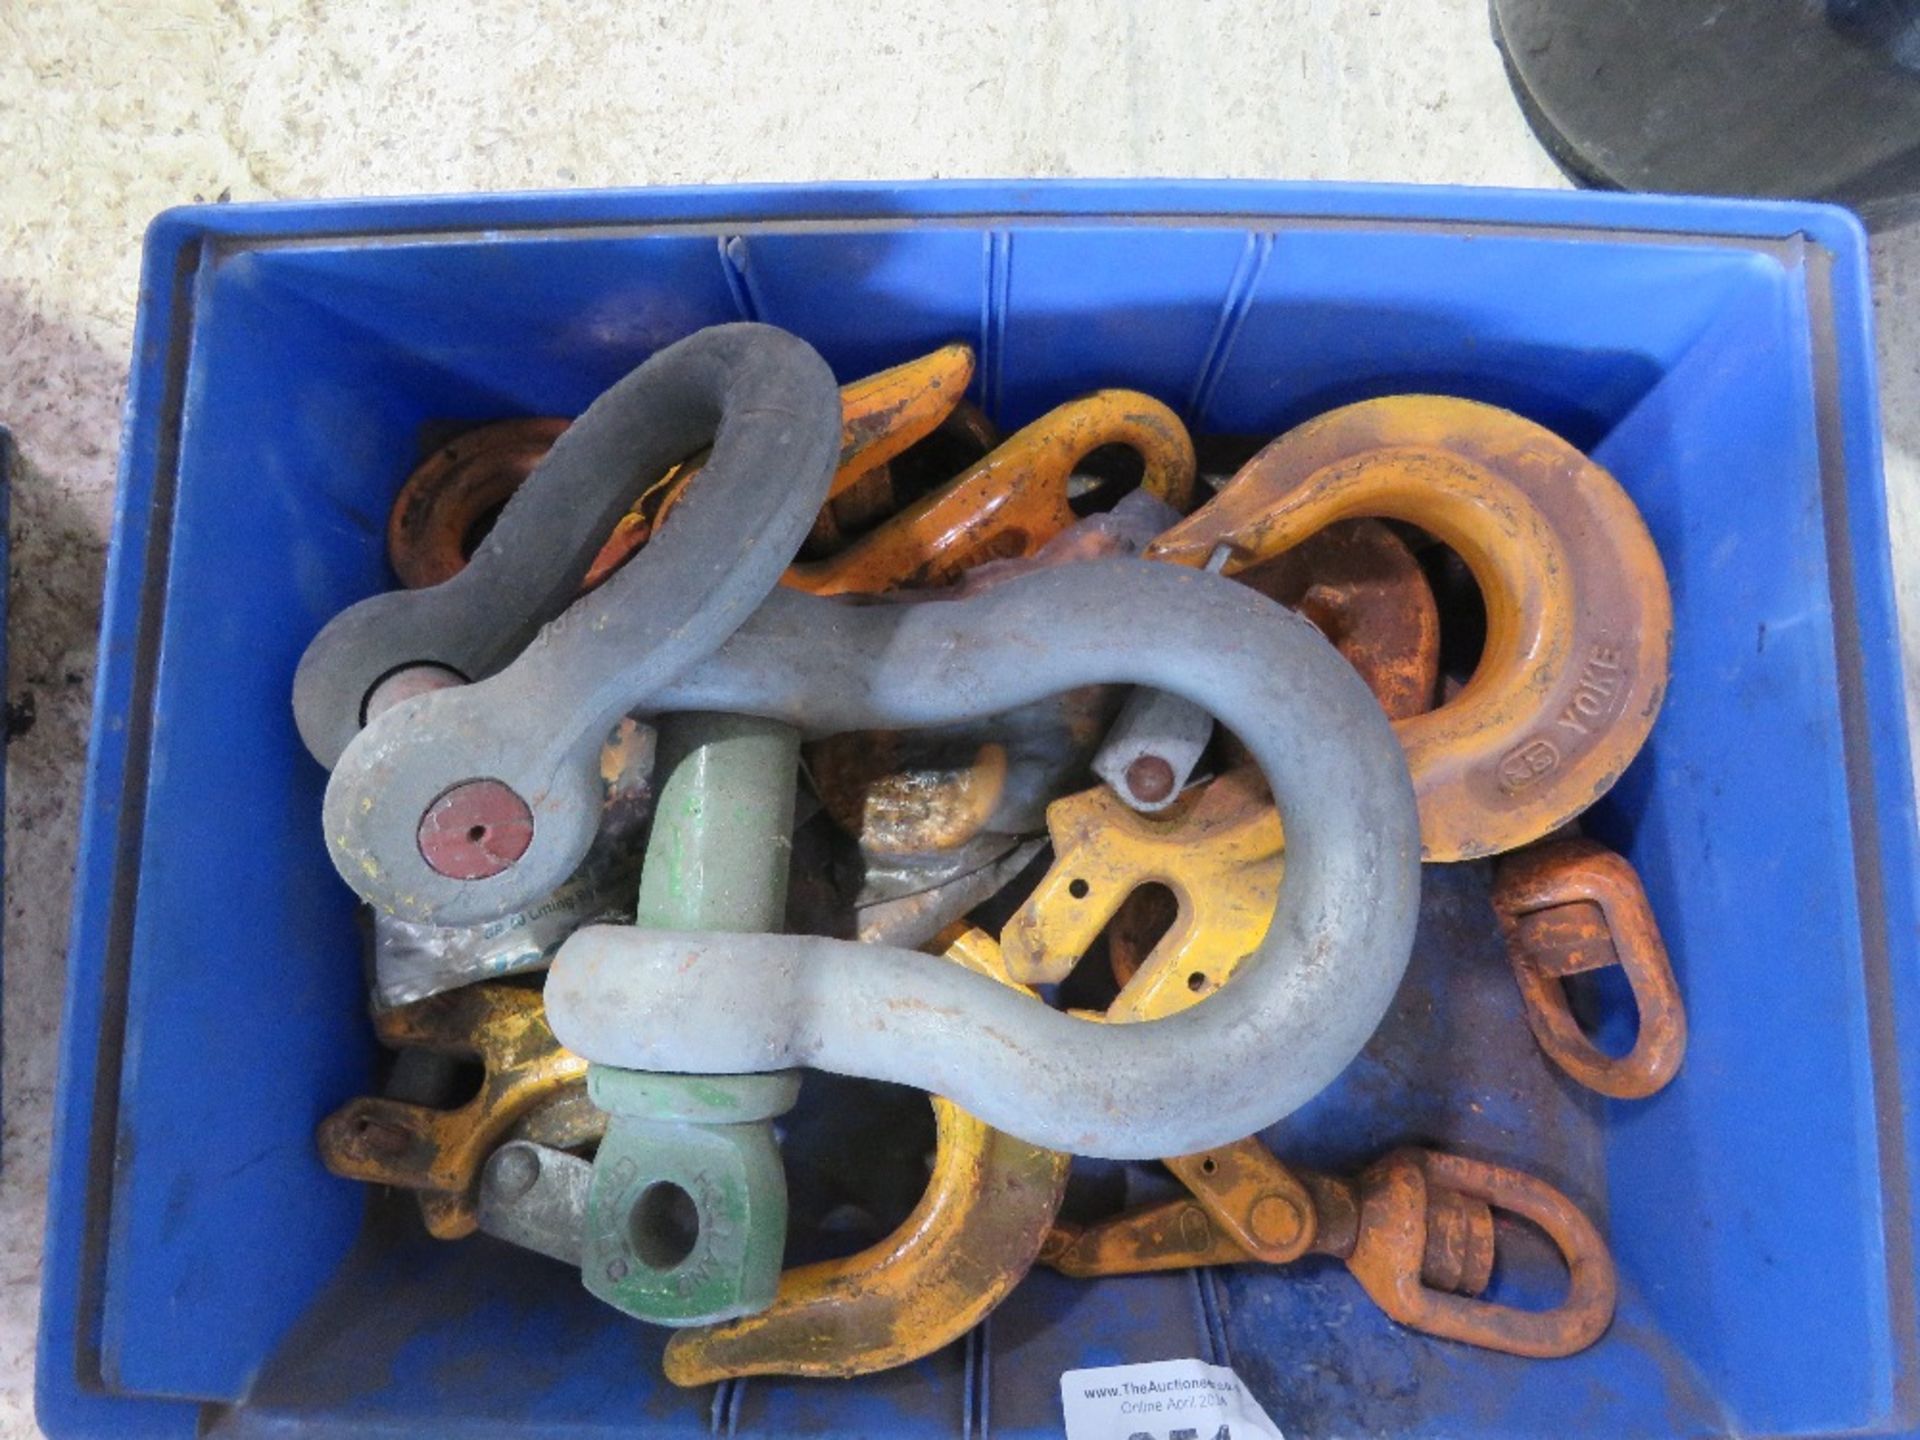 TRAY CONTAINING LARGE SHACKLES AND LIFTING HOOKS.